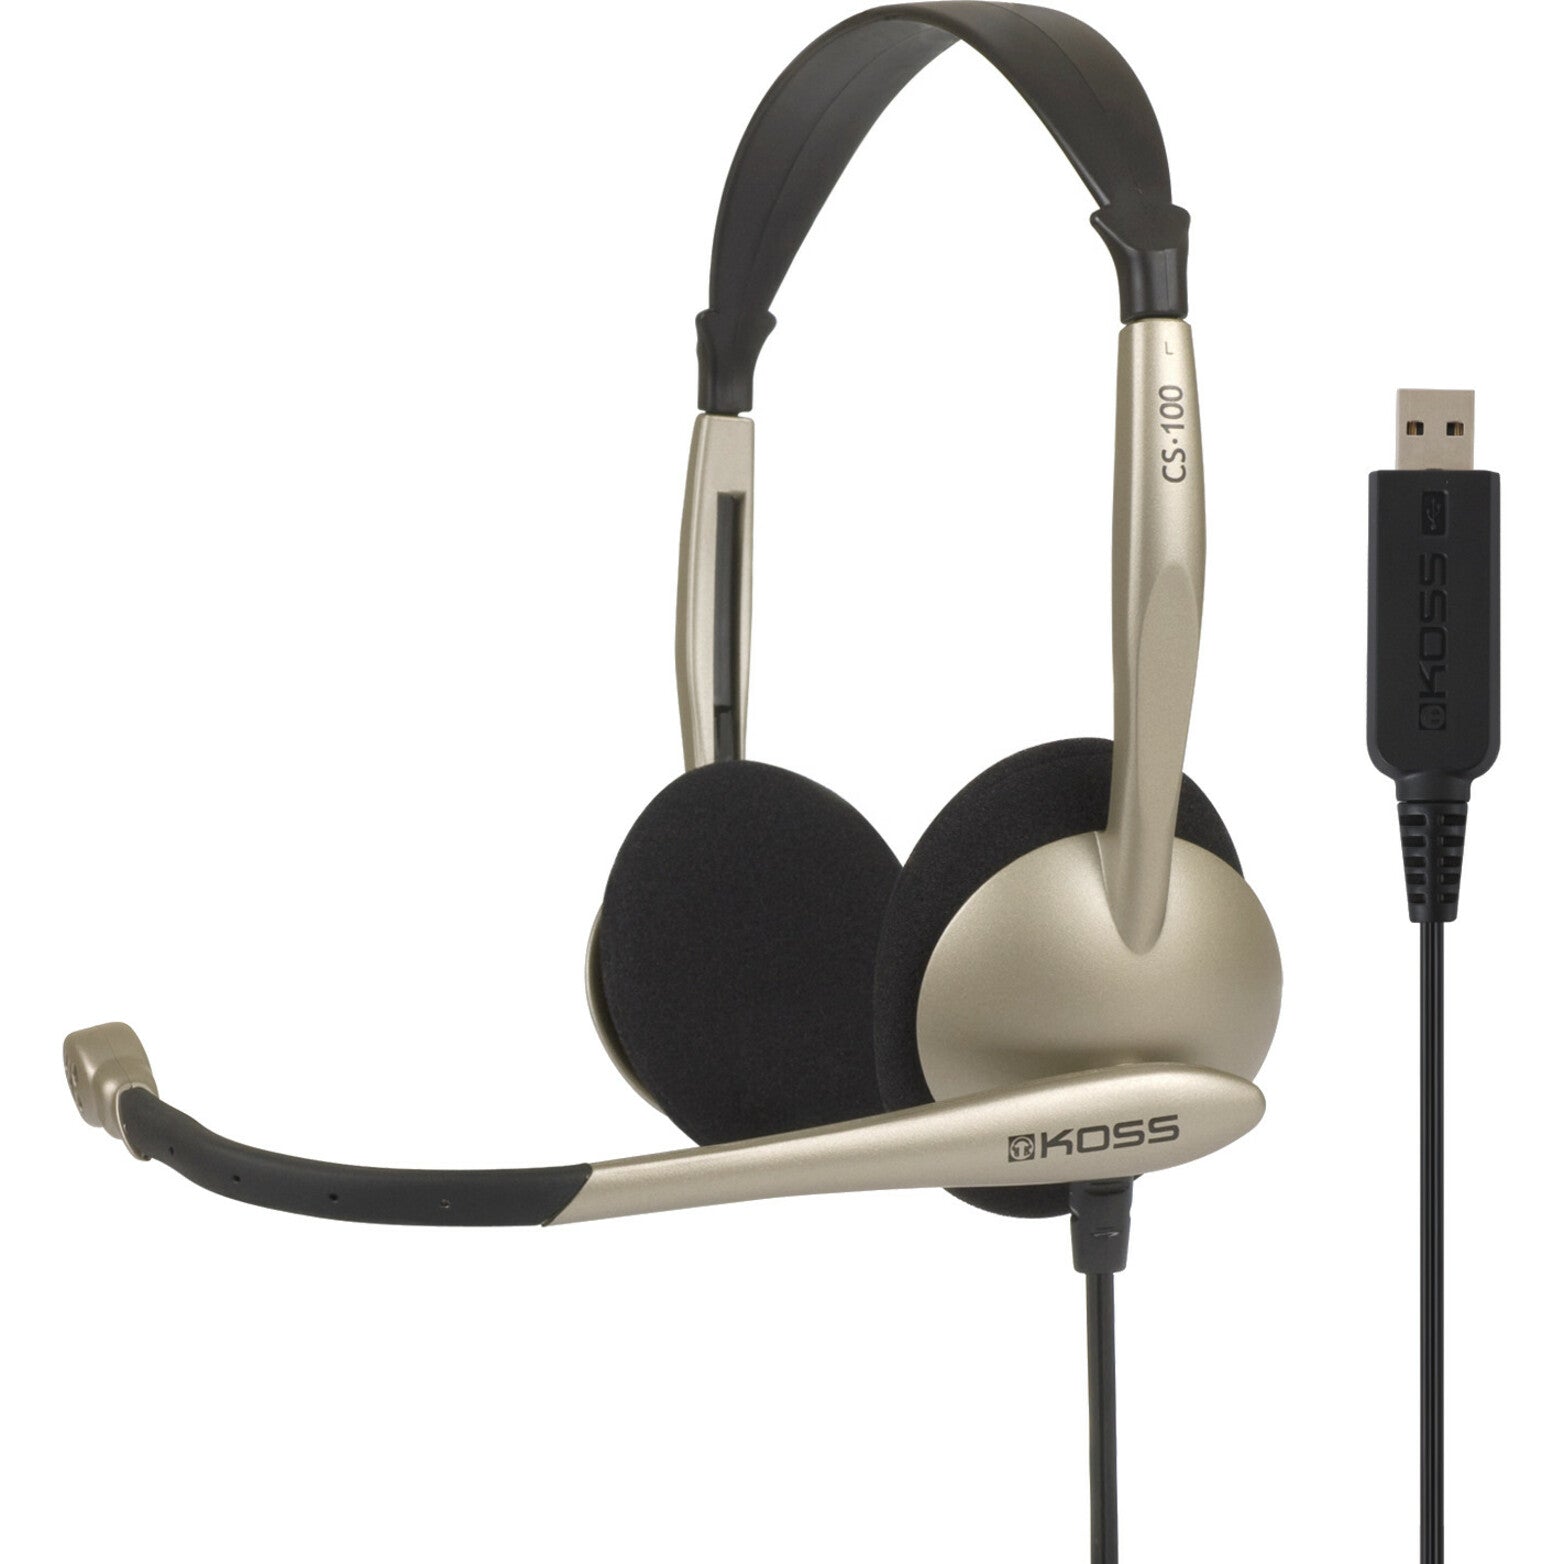 Koss CS100 USB Communication Headsets, Monaural Over-the-head Headset with Noise Reduction and Adjustable Headband